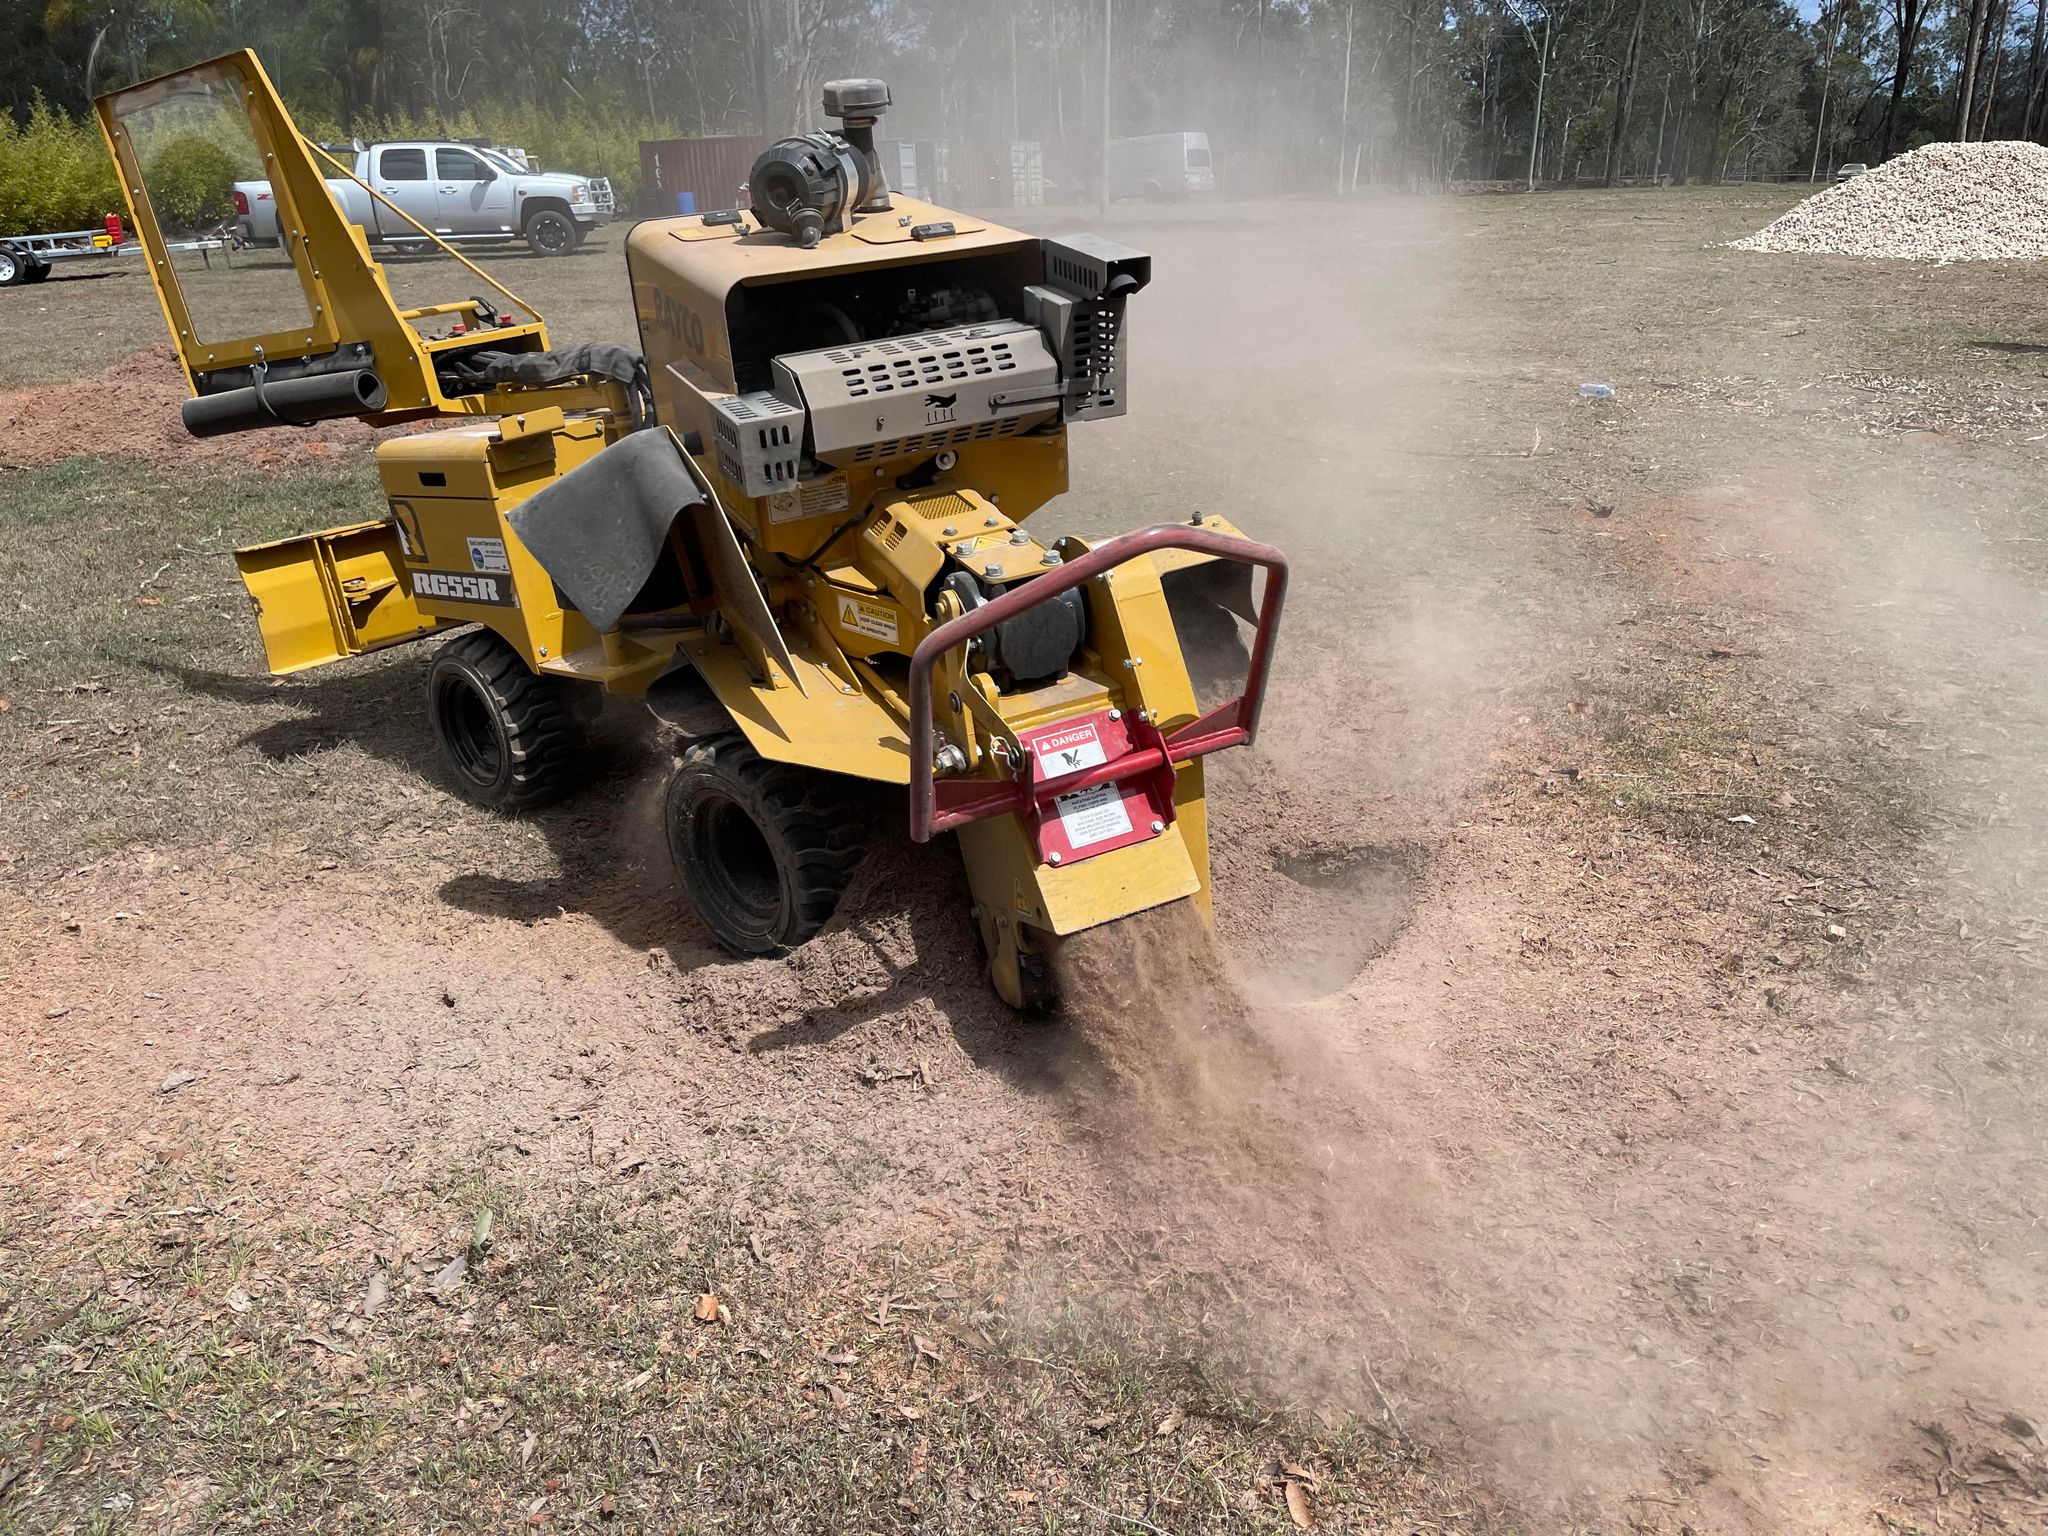 Professional stump grinding machinery at work with visible cost breakdown.